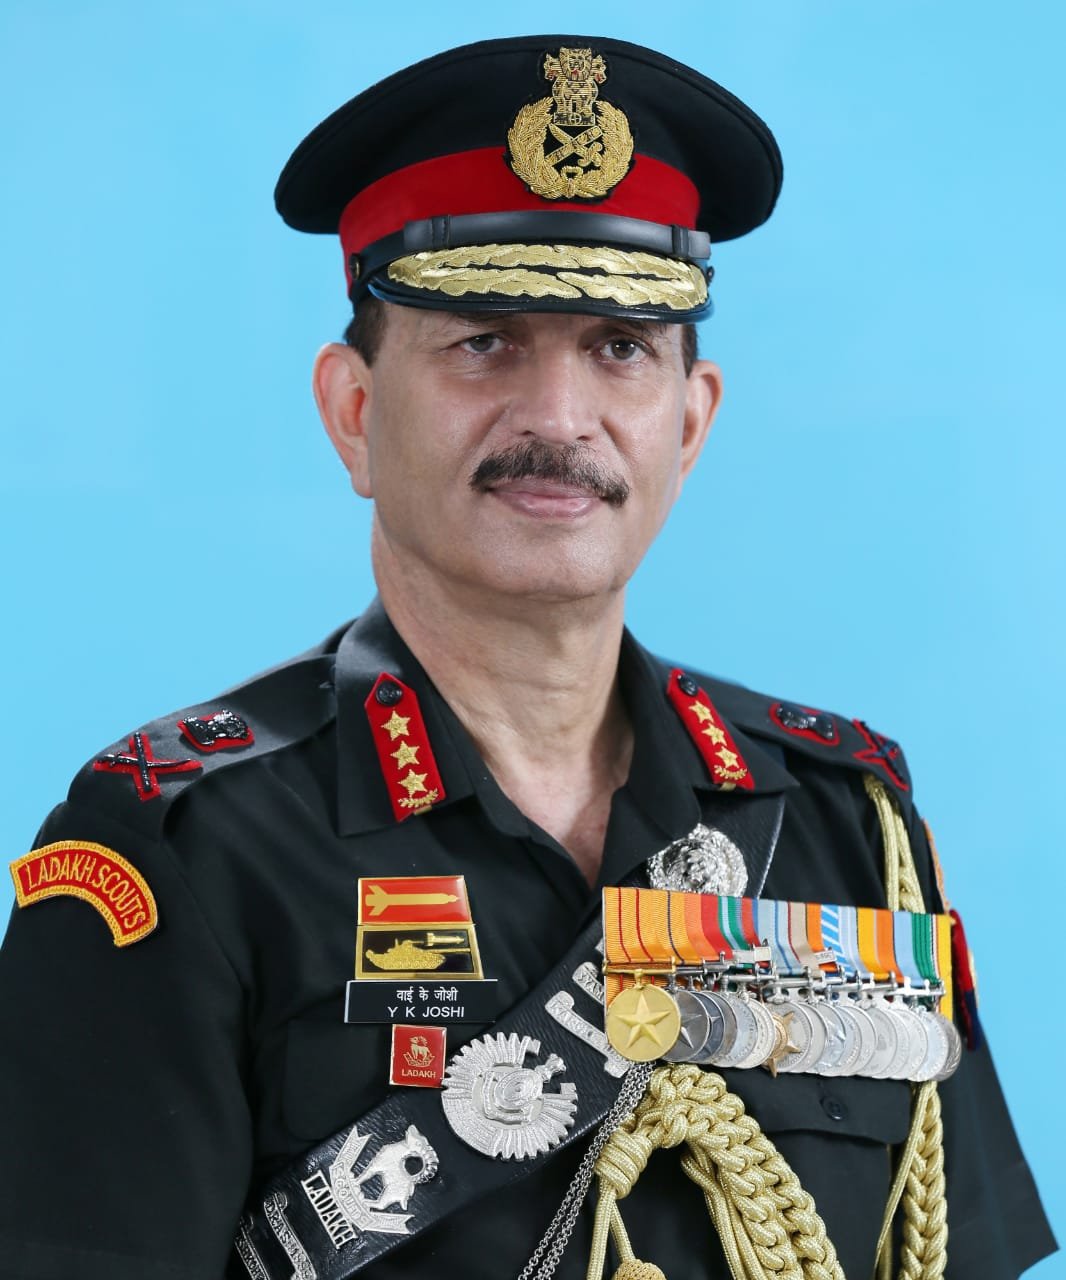 Lieutenant General YK Joshi will assume the charge as General OfficerCommanding-in-Chief (GOC-in-C), Northern Army Command at Udhampur (J &K) on February 1.